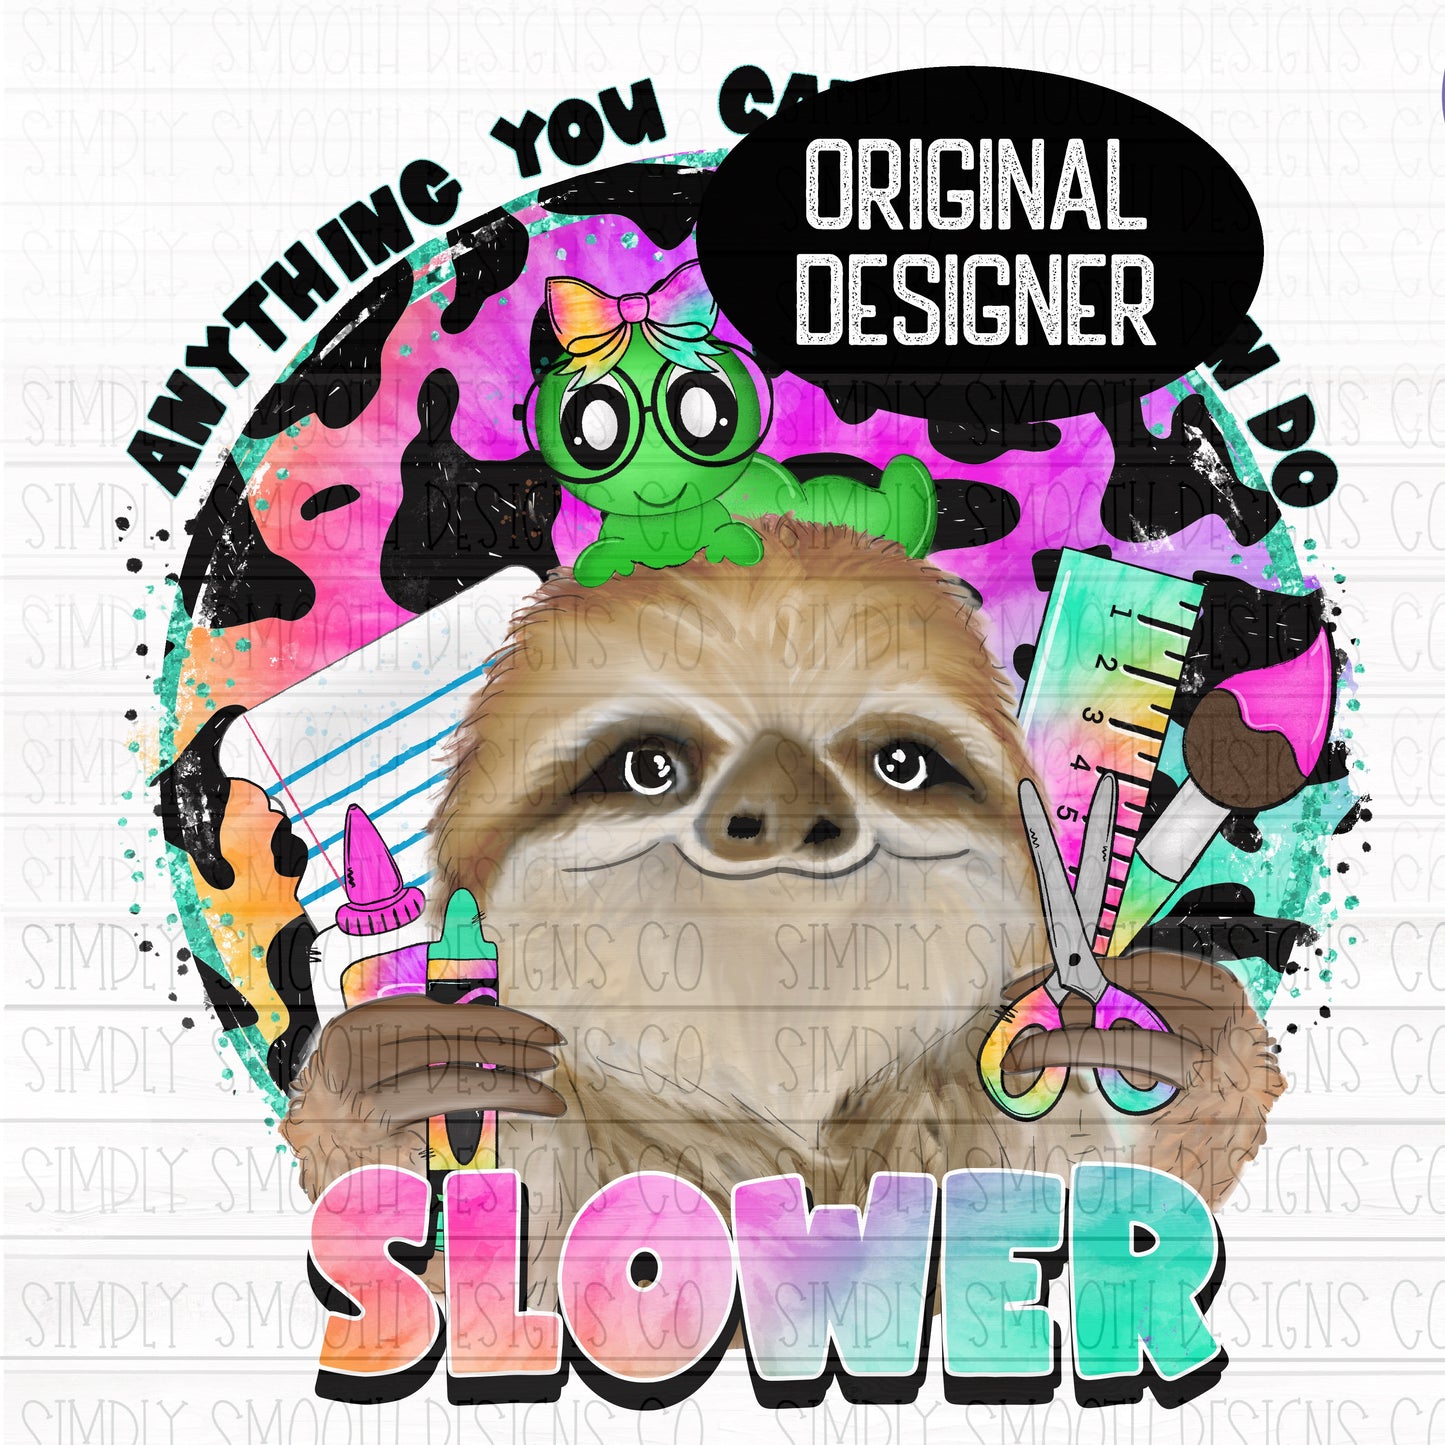 Anything you can do I can do slower sloth